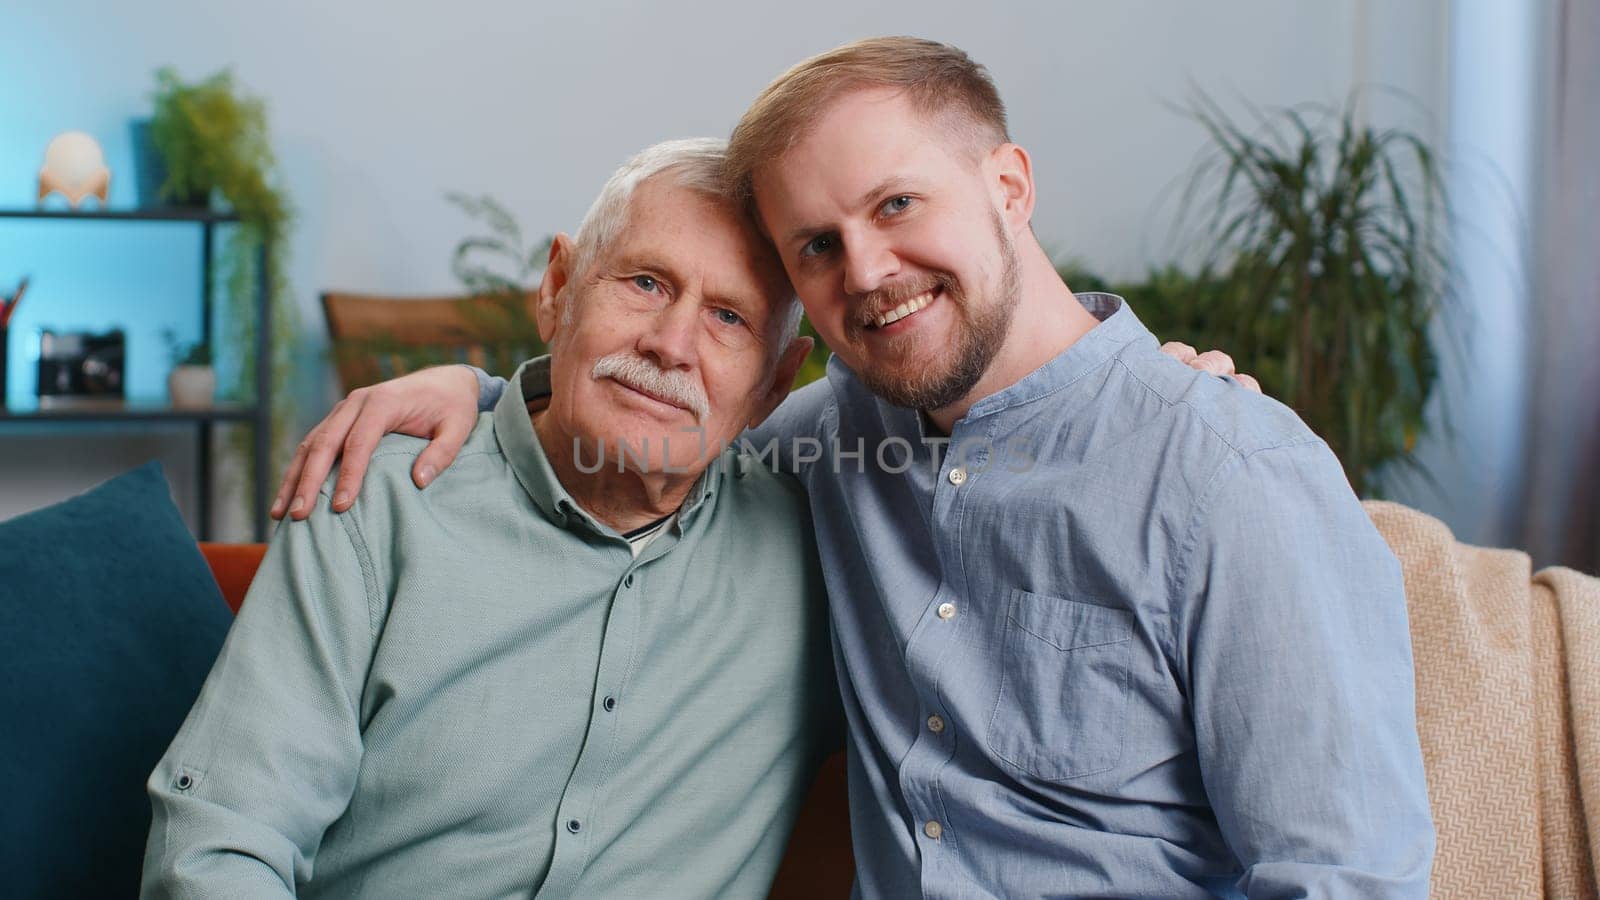 Portrait of senior grandfather with young adult man grandson smiling happy embracing hugging. Elderly father with son sitting on couch at home room. Male generations family. Bonding, good relationship